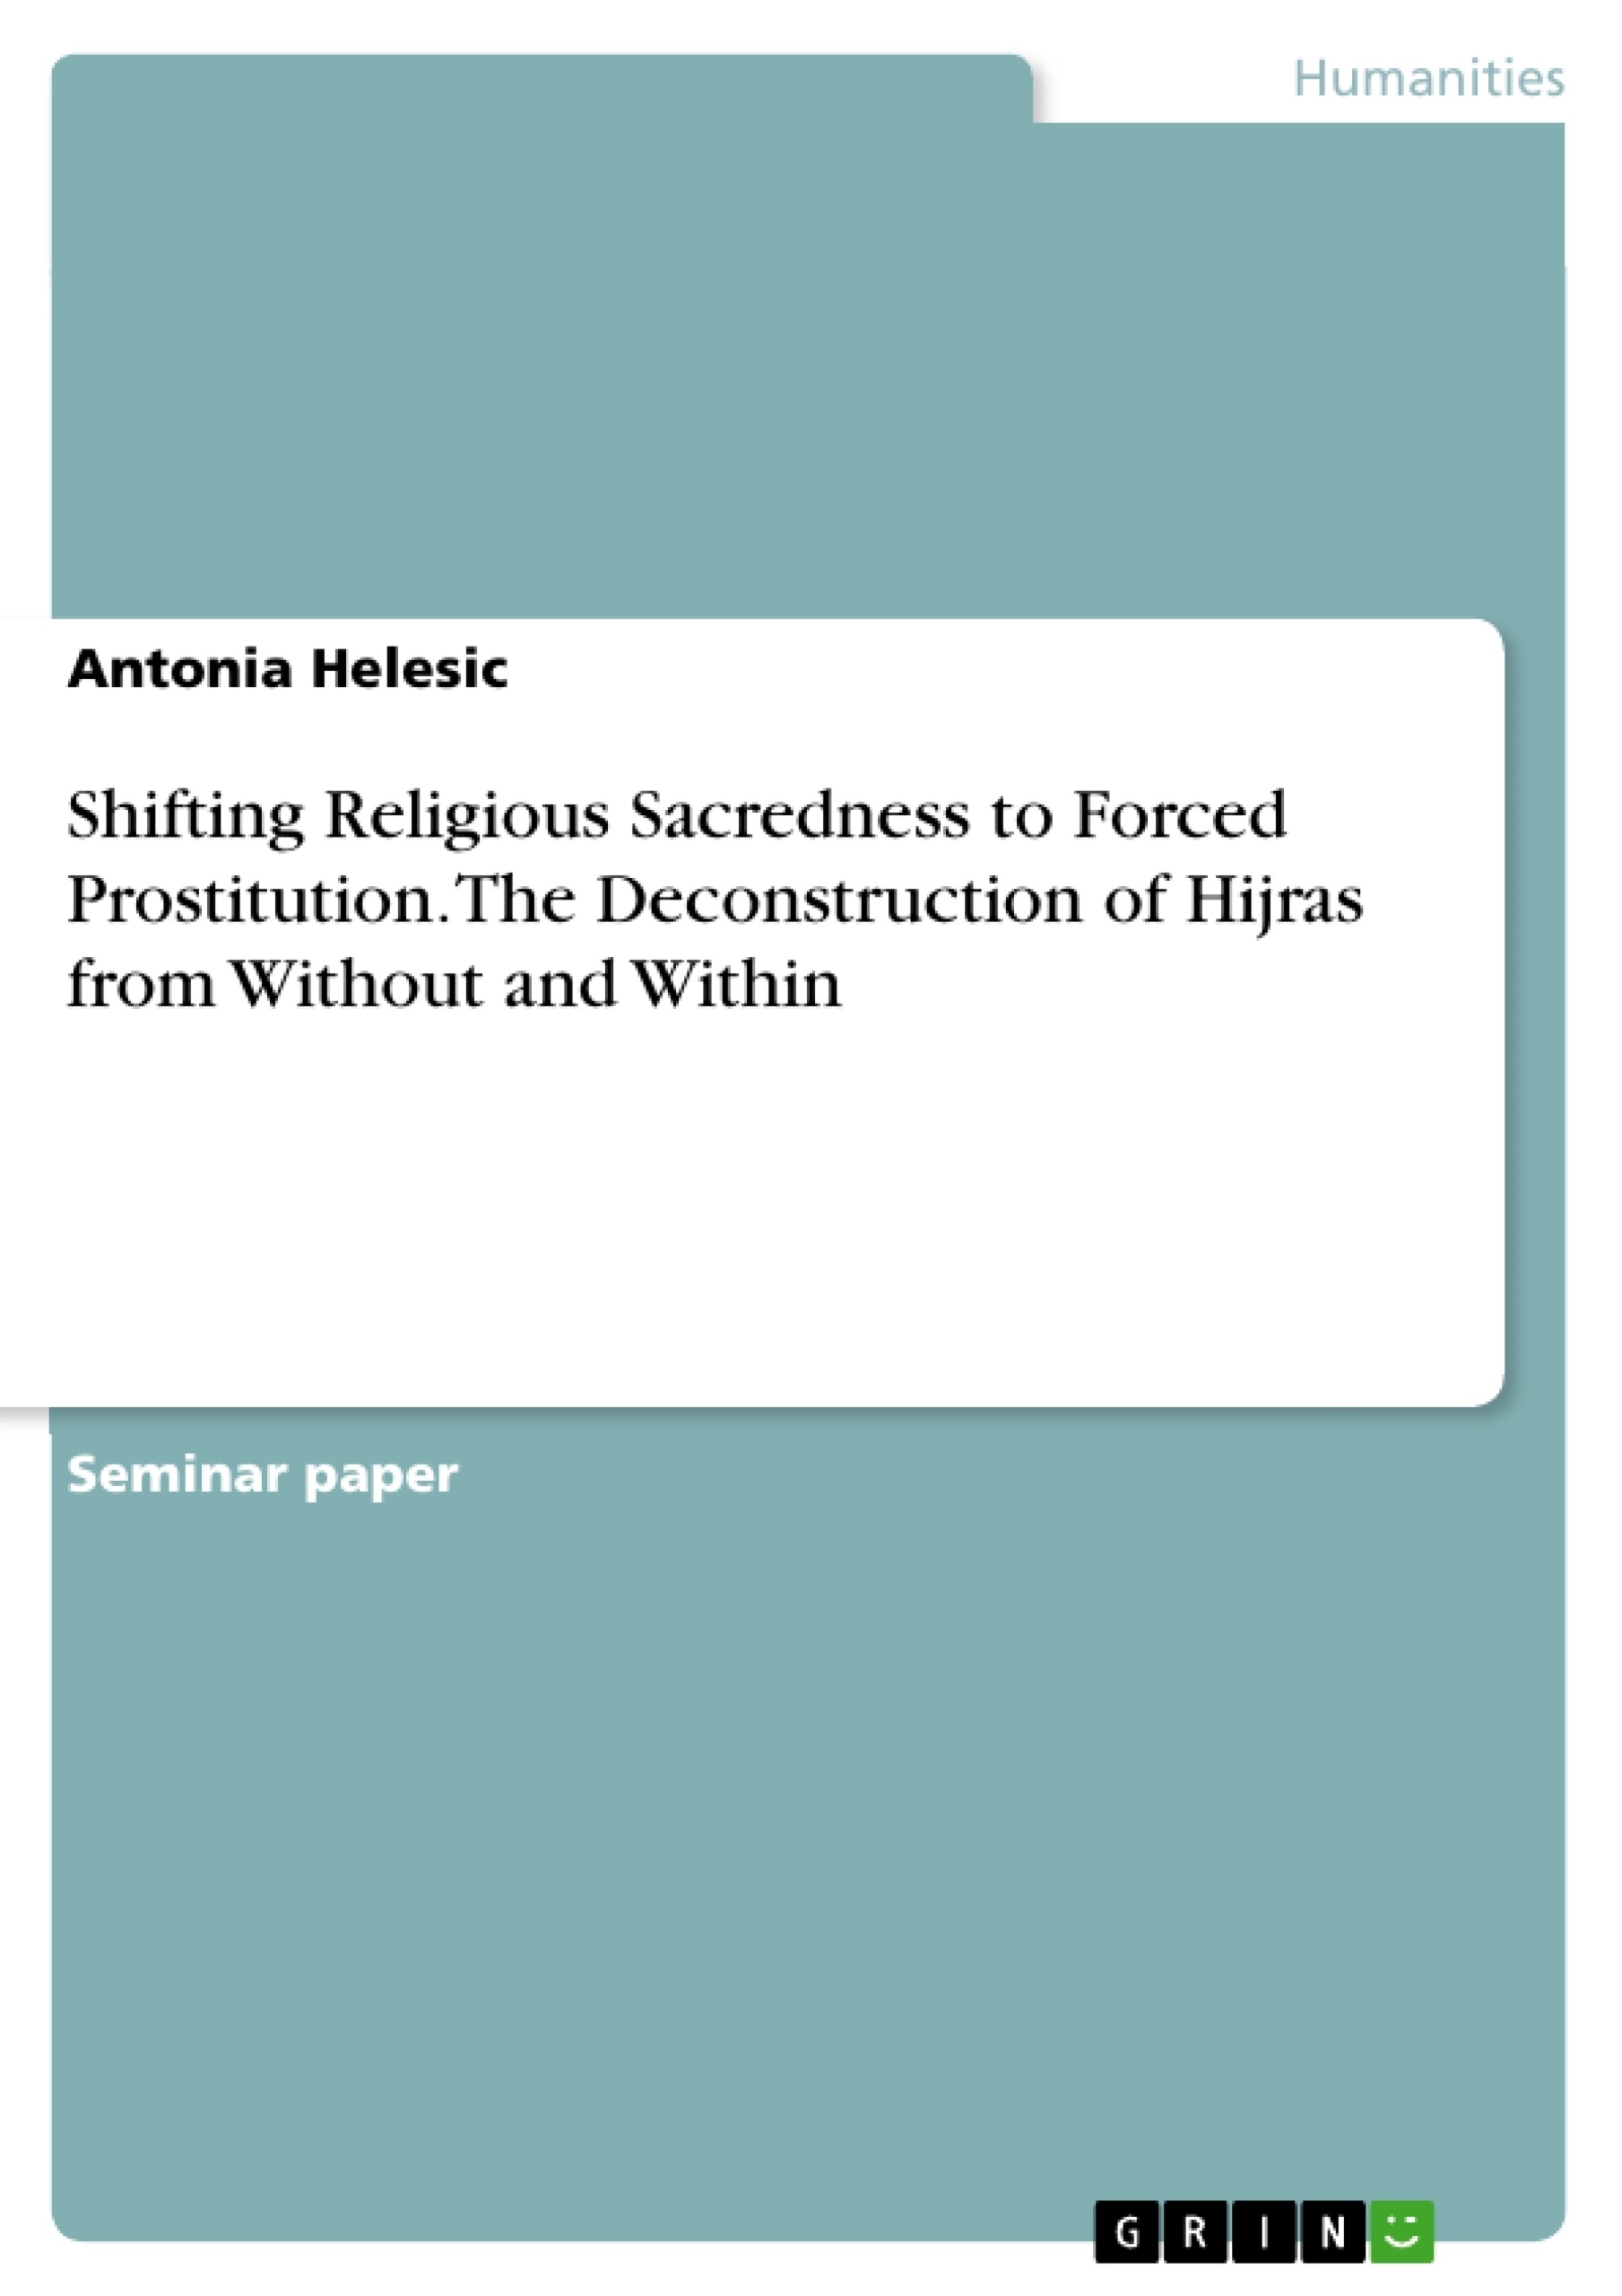 Titre: Shifting Religious Sacredness to Forced Prostitution. The Deconstruction of Hijras from Without and Within